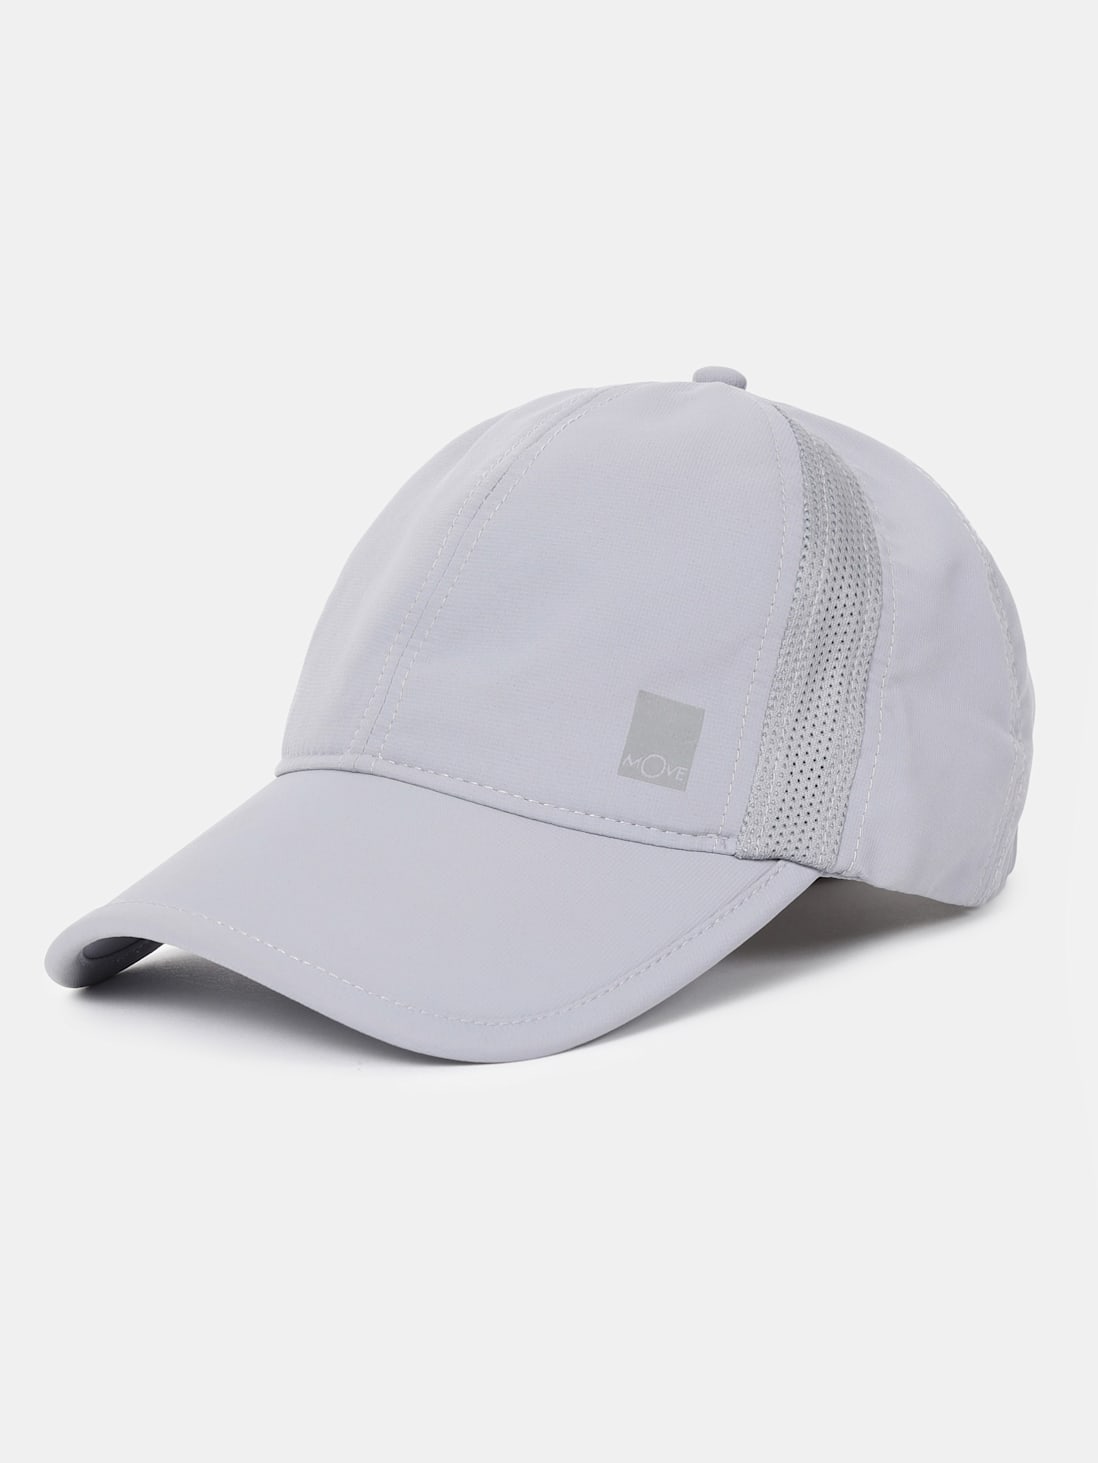 Buy Polyester Solid Cap with Adjustable Back Closure and Stay Dry  Technology - White CP21